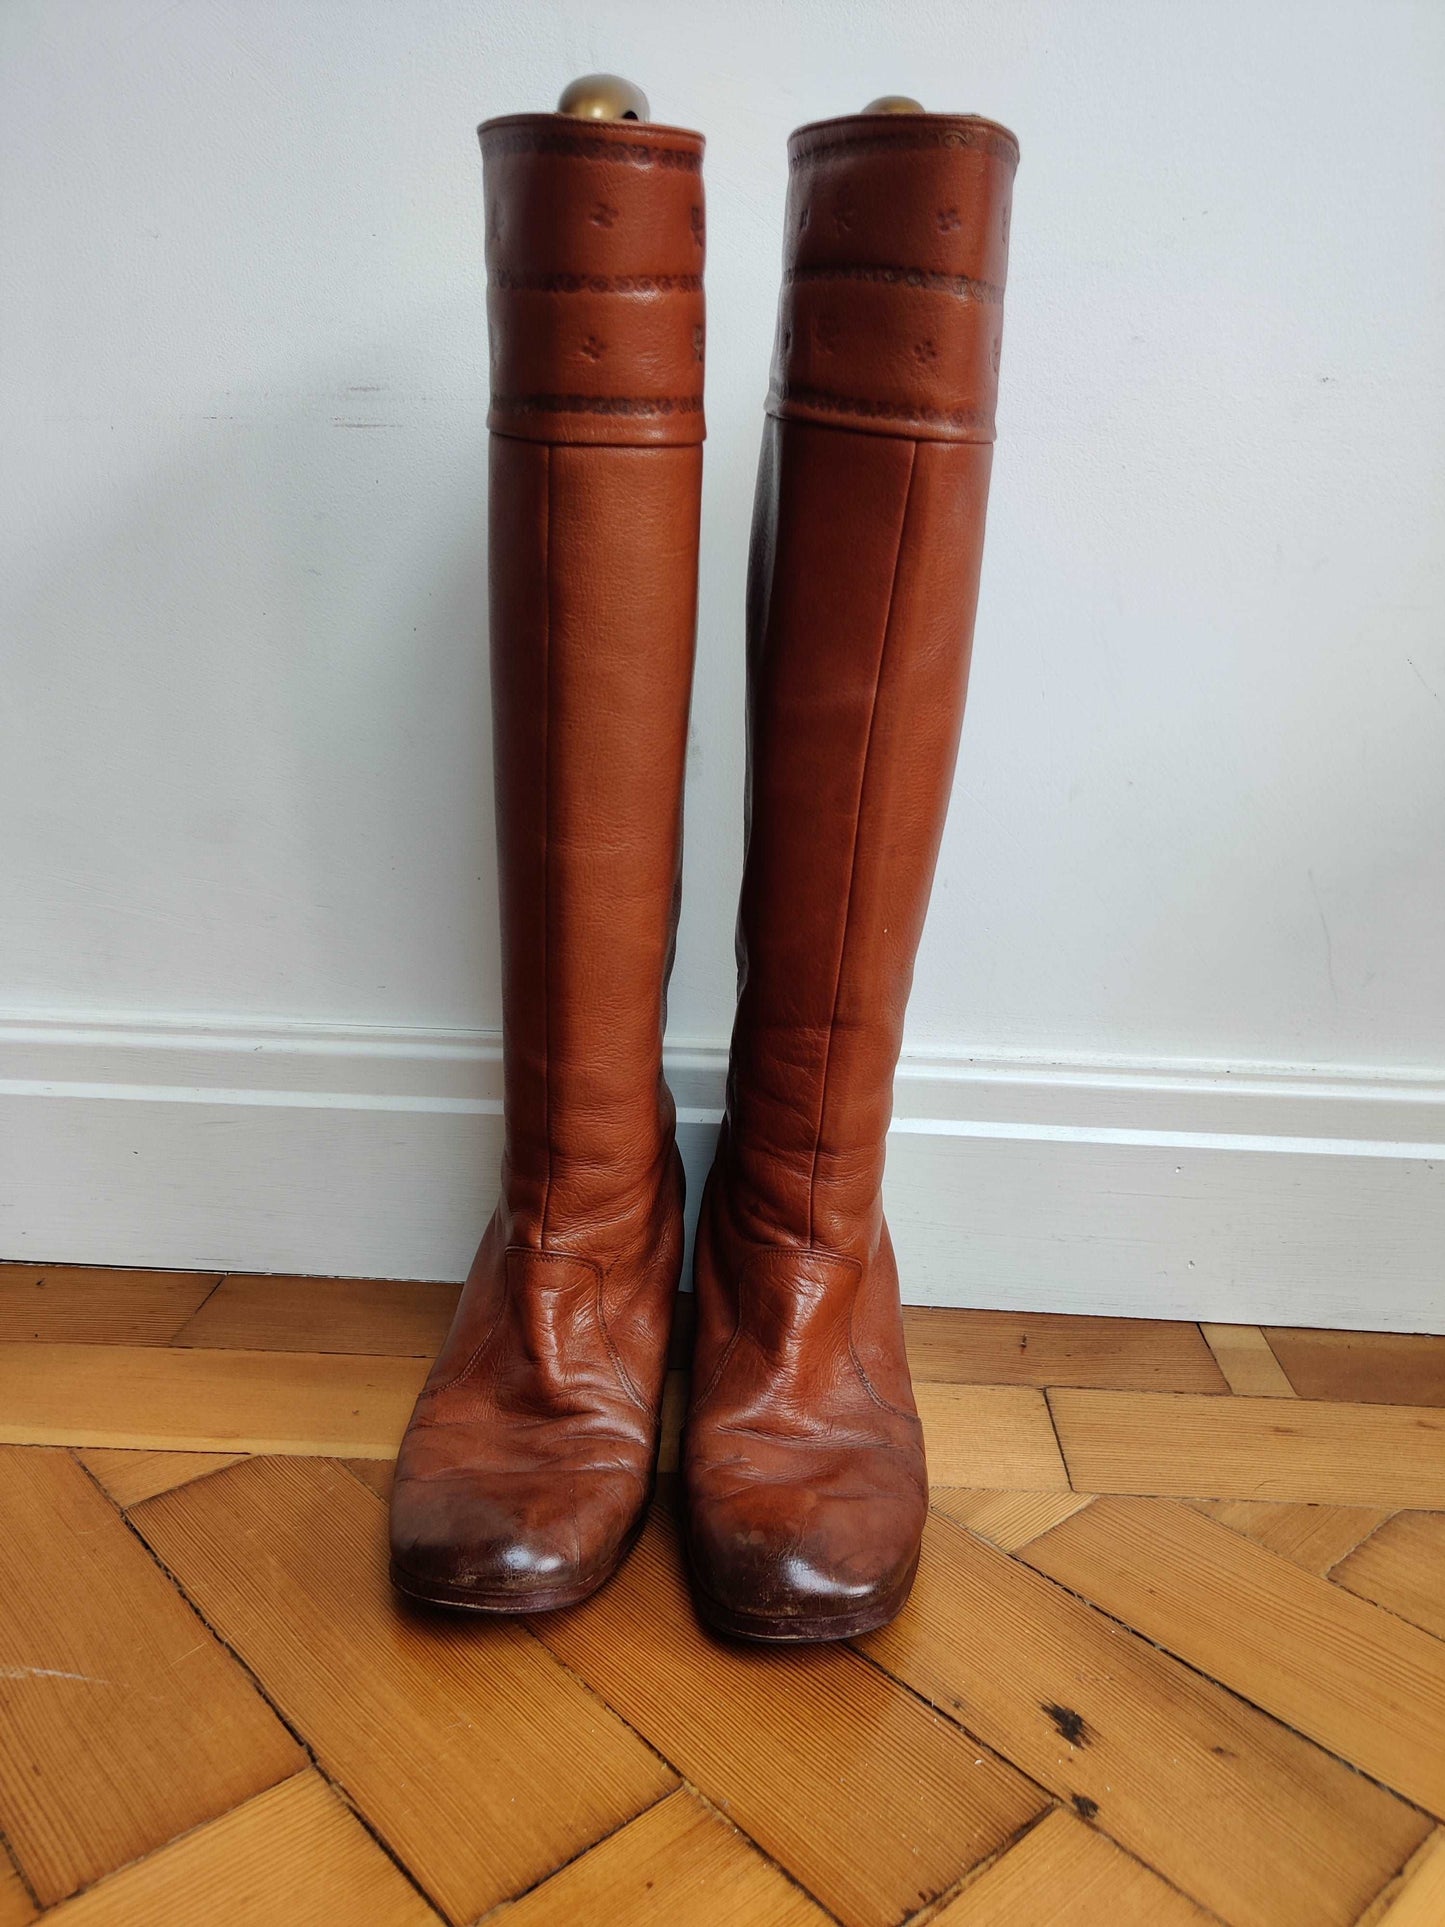 Tan 70s boots with heel.